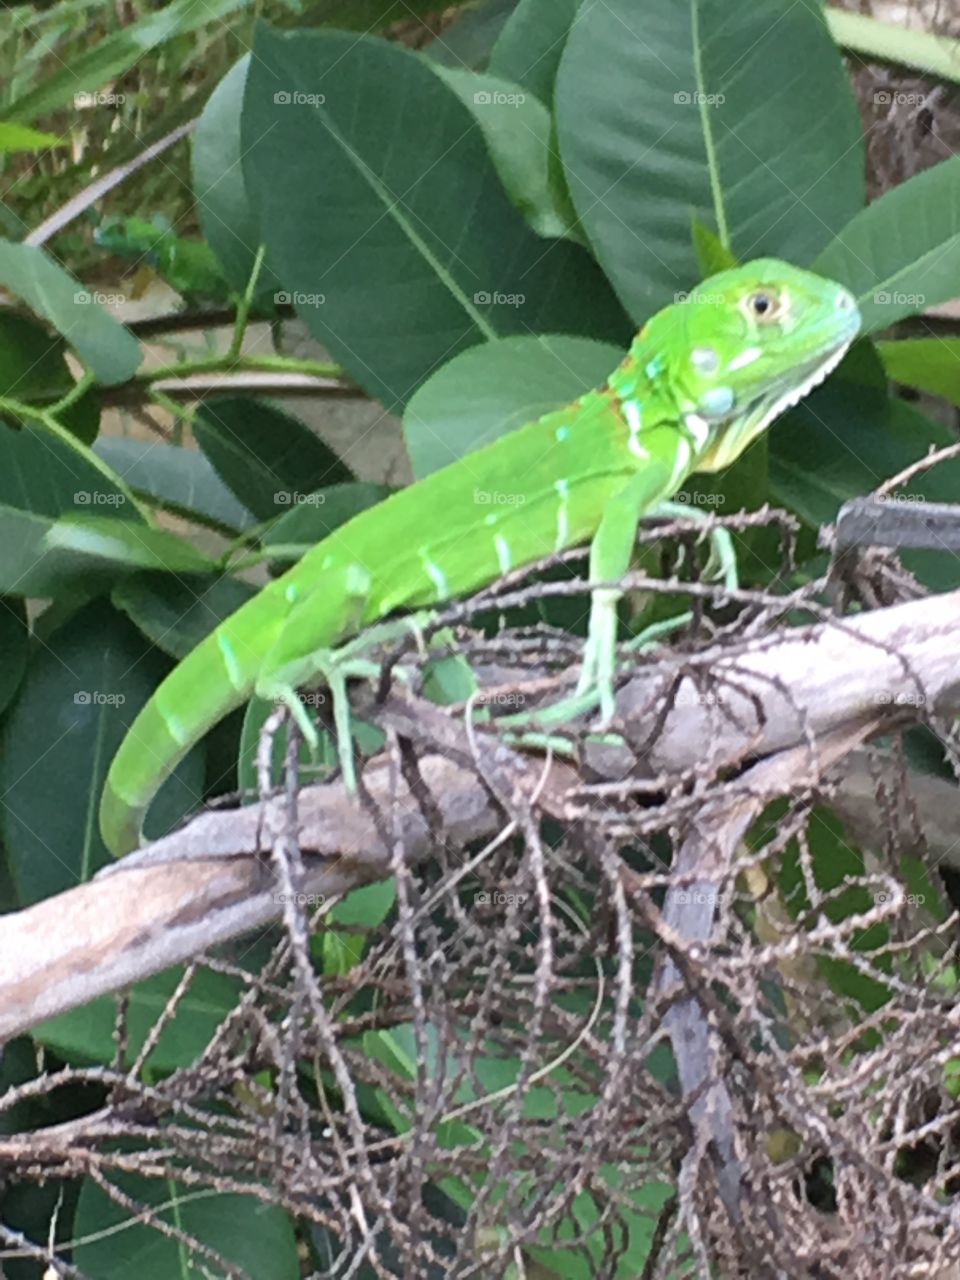 Large green lizard in nature 